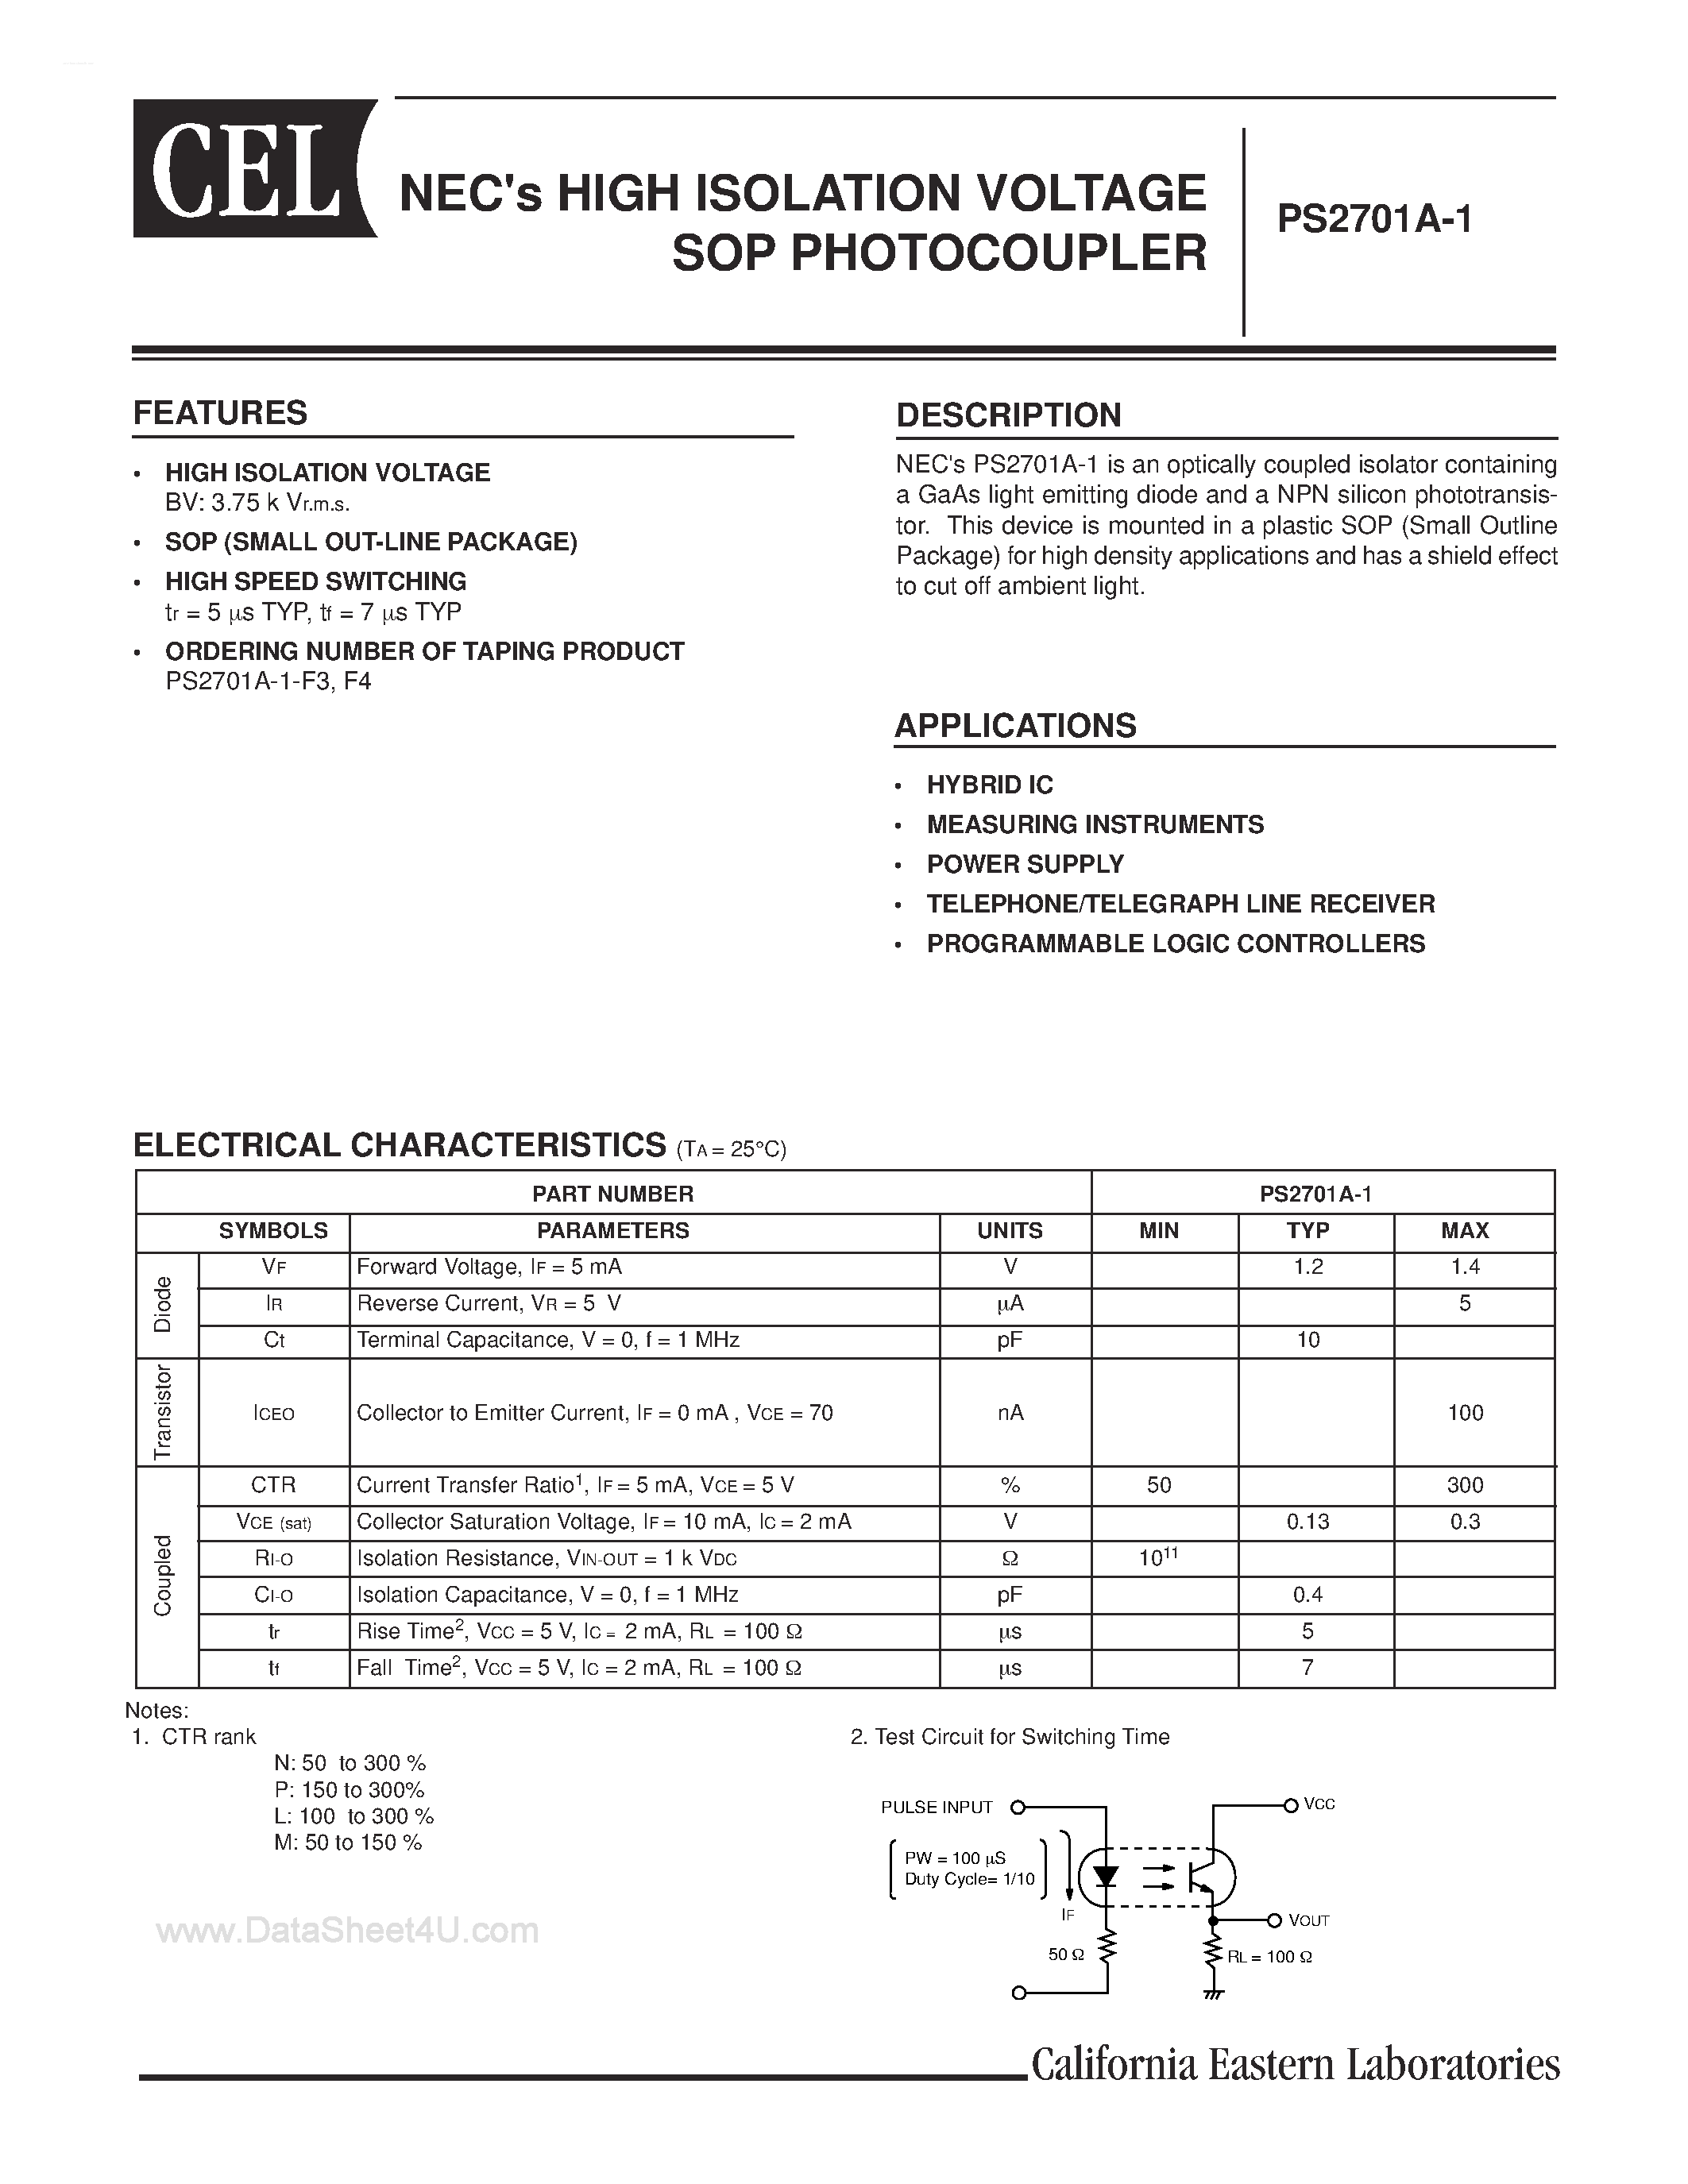 Datasheet PS2701A-1-V-F4 - NEC is HIGH ISOLATION VOLTAGE SOP PHOTOCOUPLER page 1